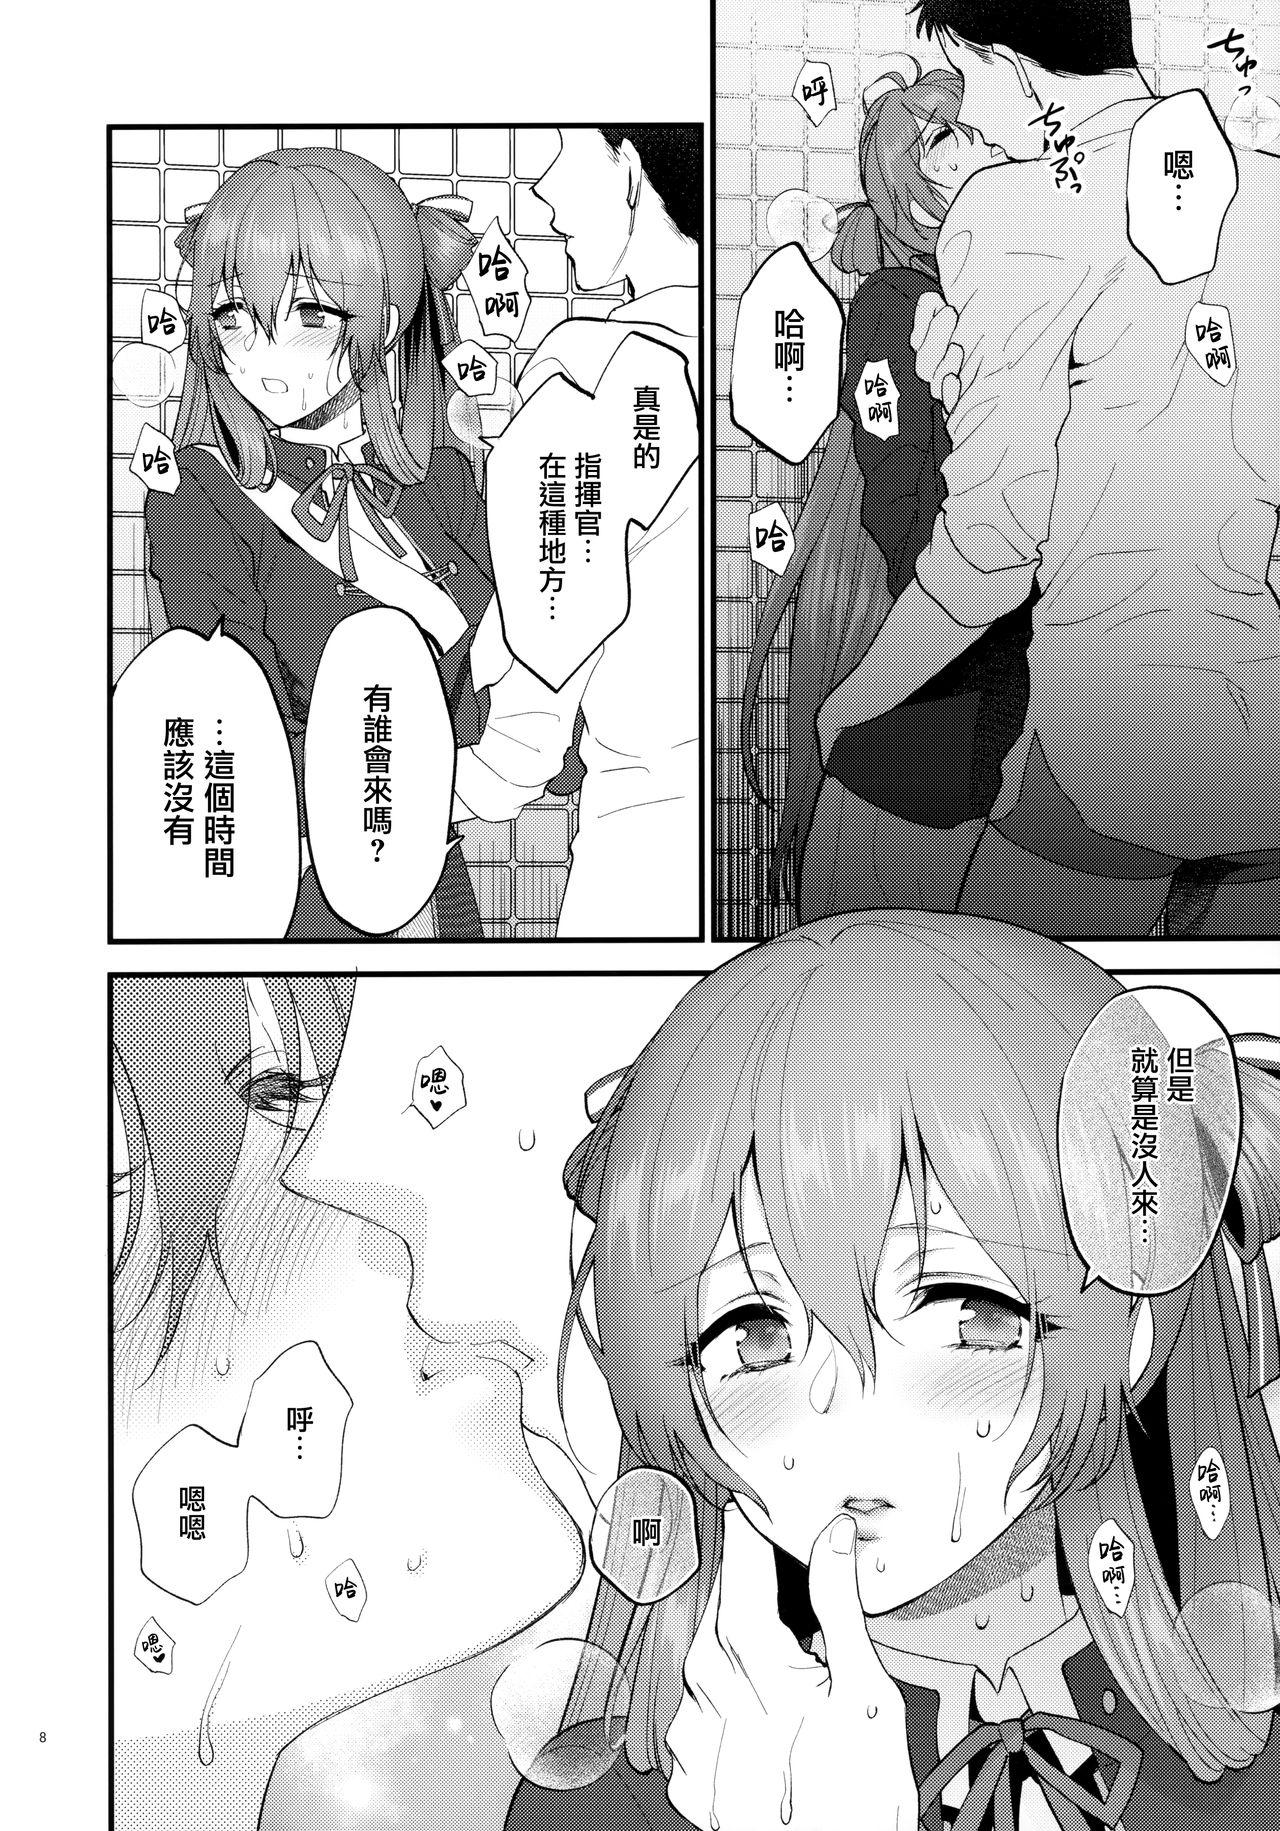 Esposa Shower Room - Girls frontline Stripping - Page 7